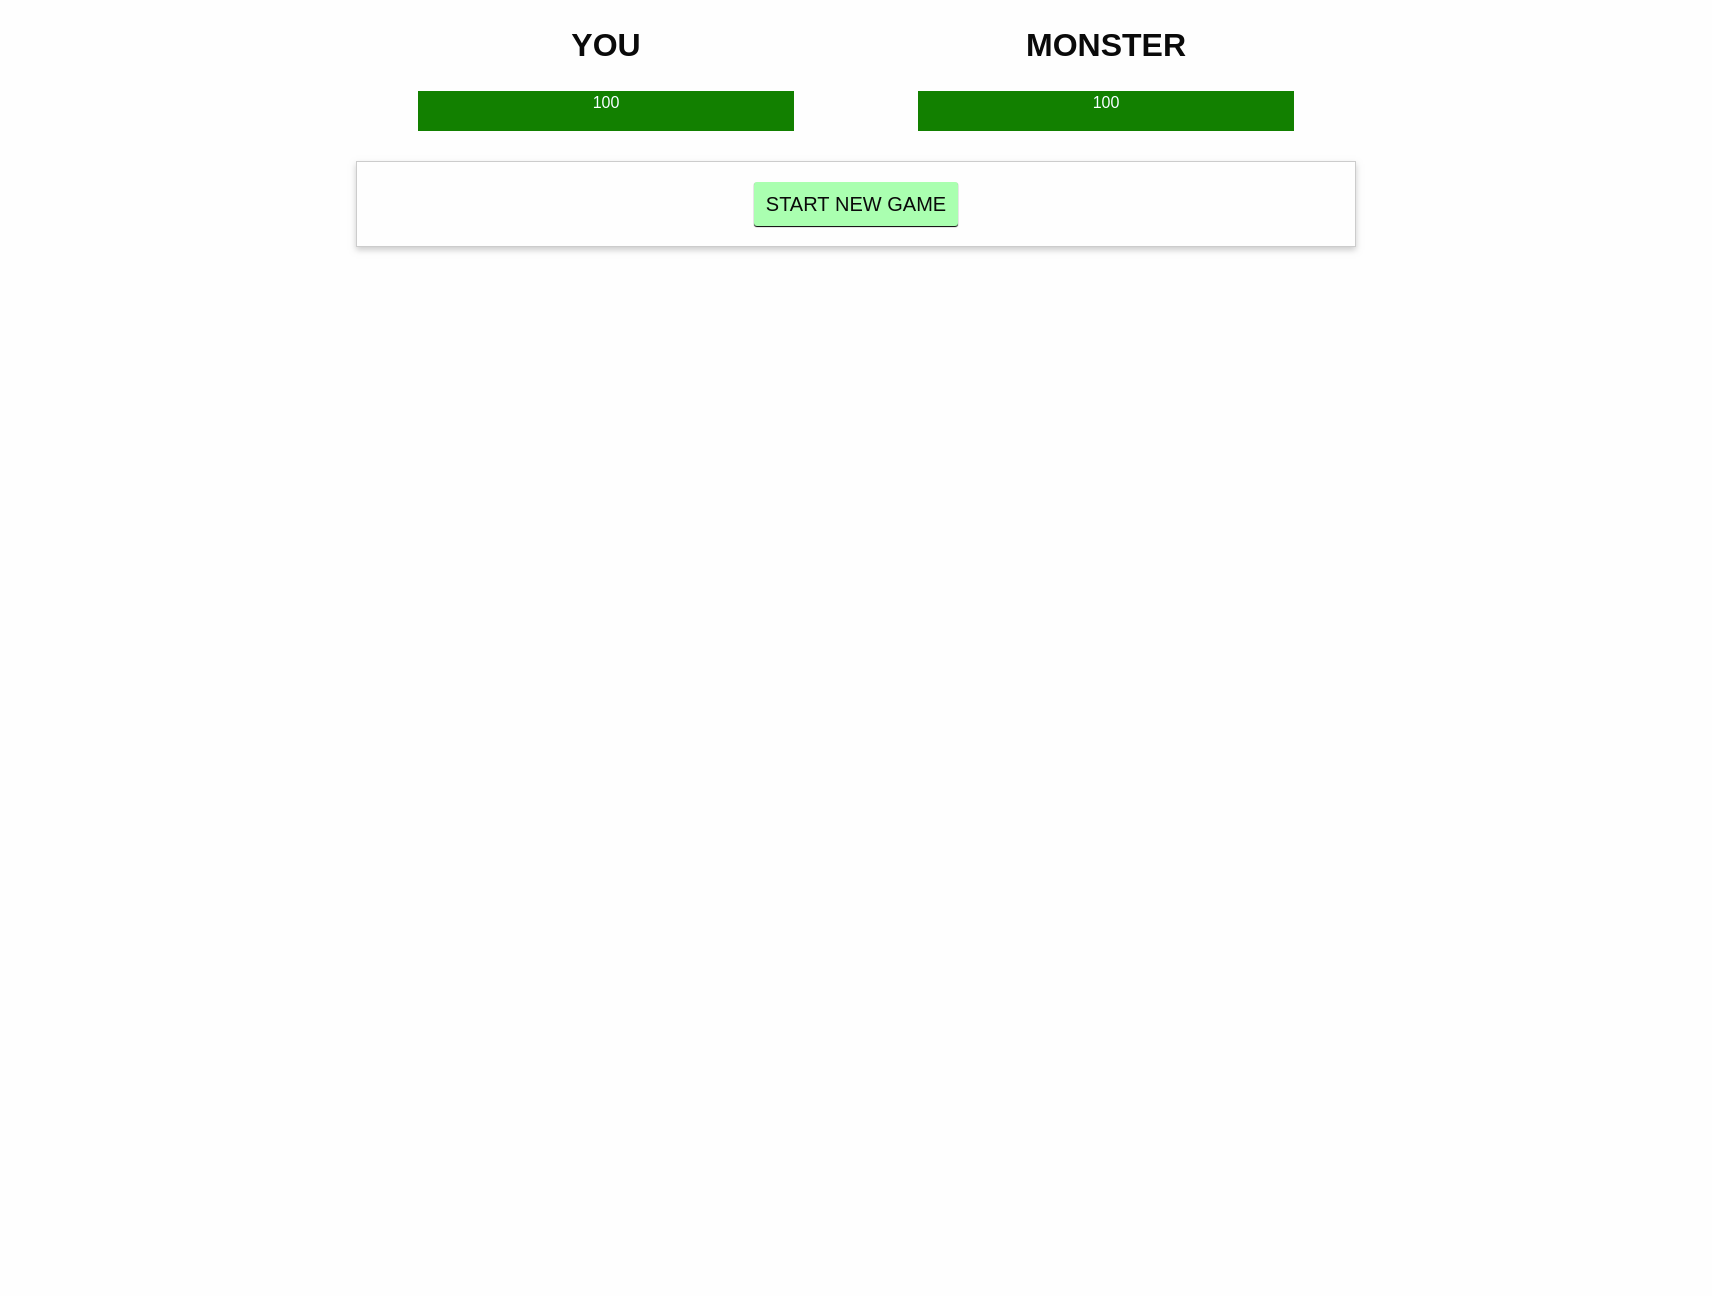 Screenshot of the Vue Monster Fight application site.